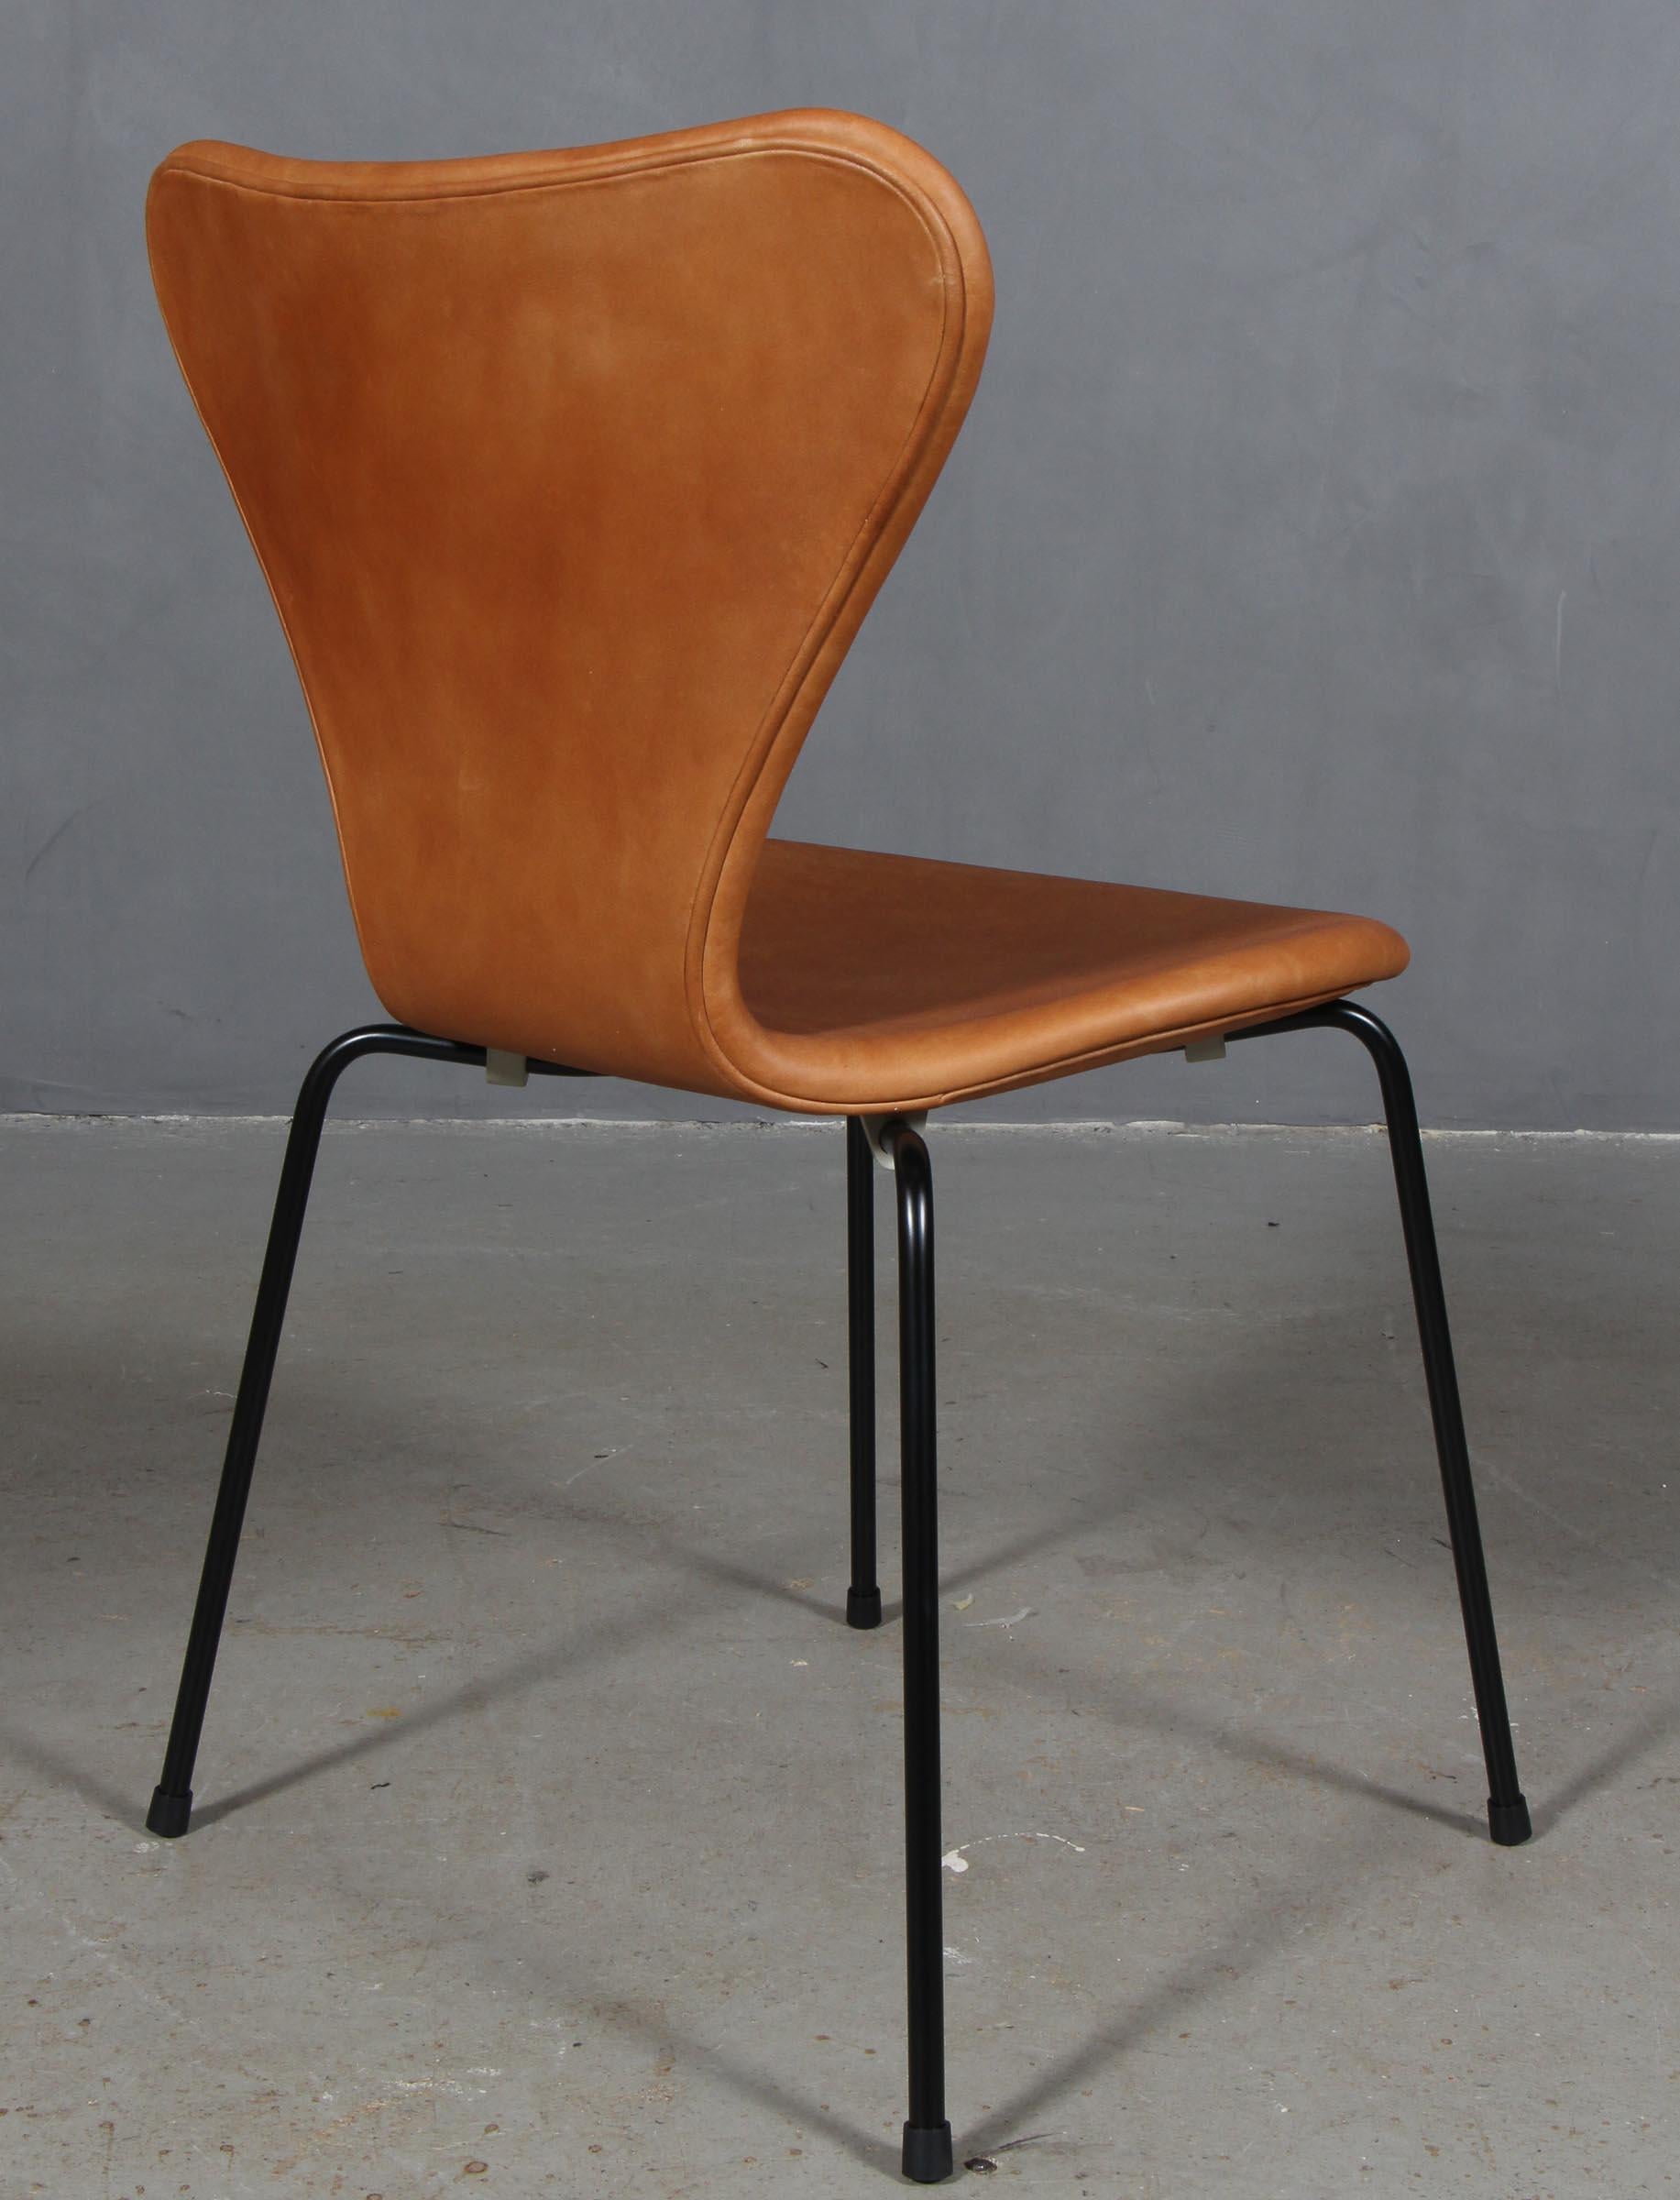 Mid-20th Century Arne Jacobsen Dining Chair For Sale